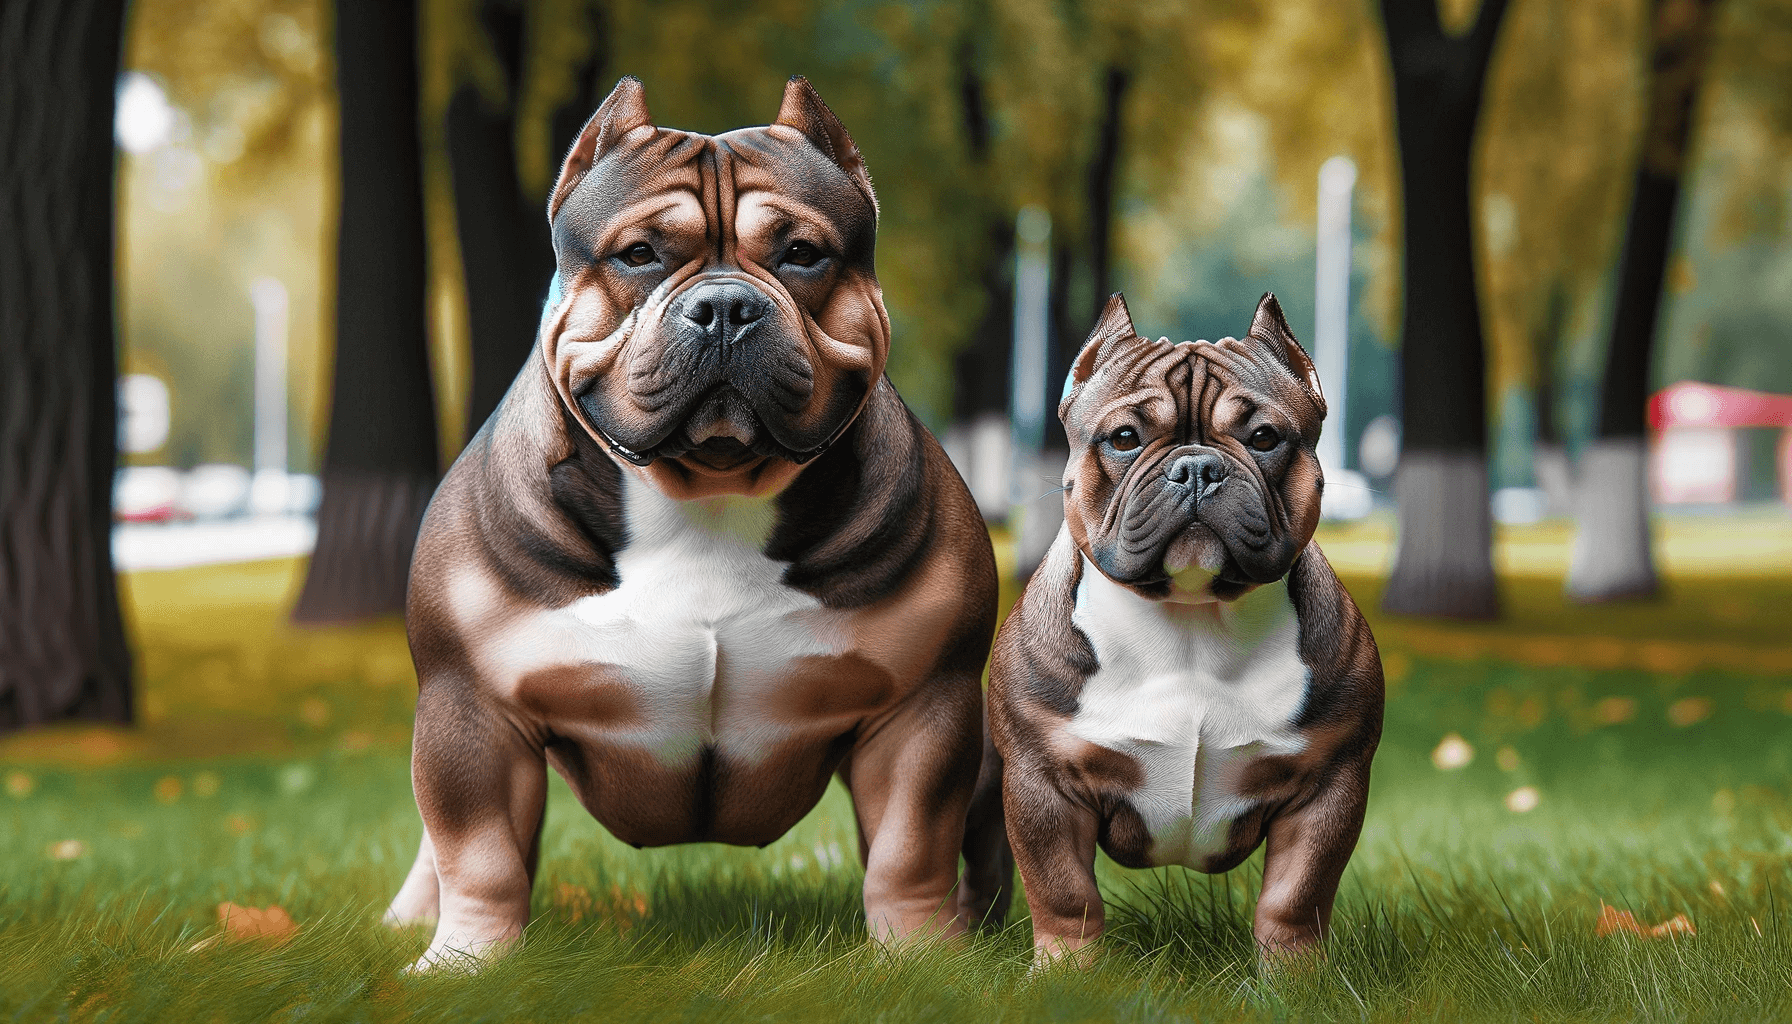 Male and female Exotic Bully side by side in a park, illustrating the size and build differences between the genders.